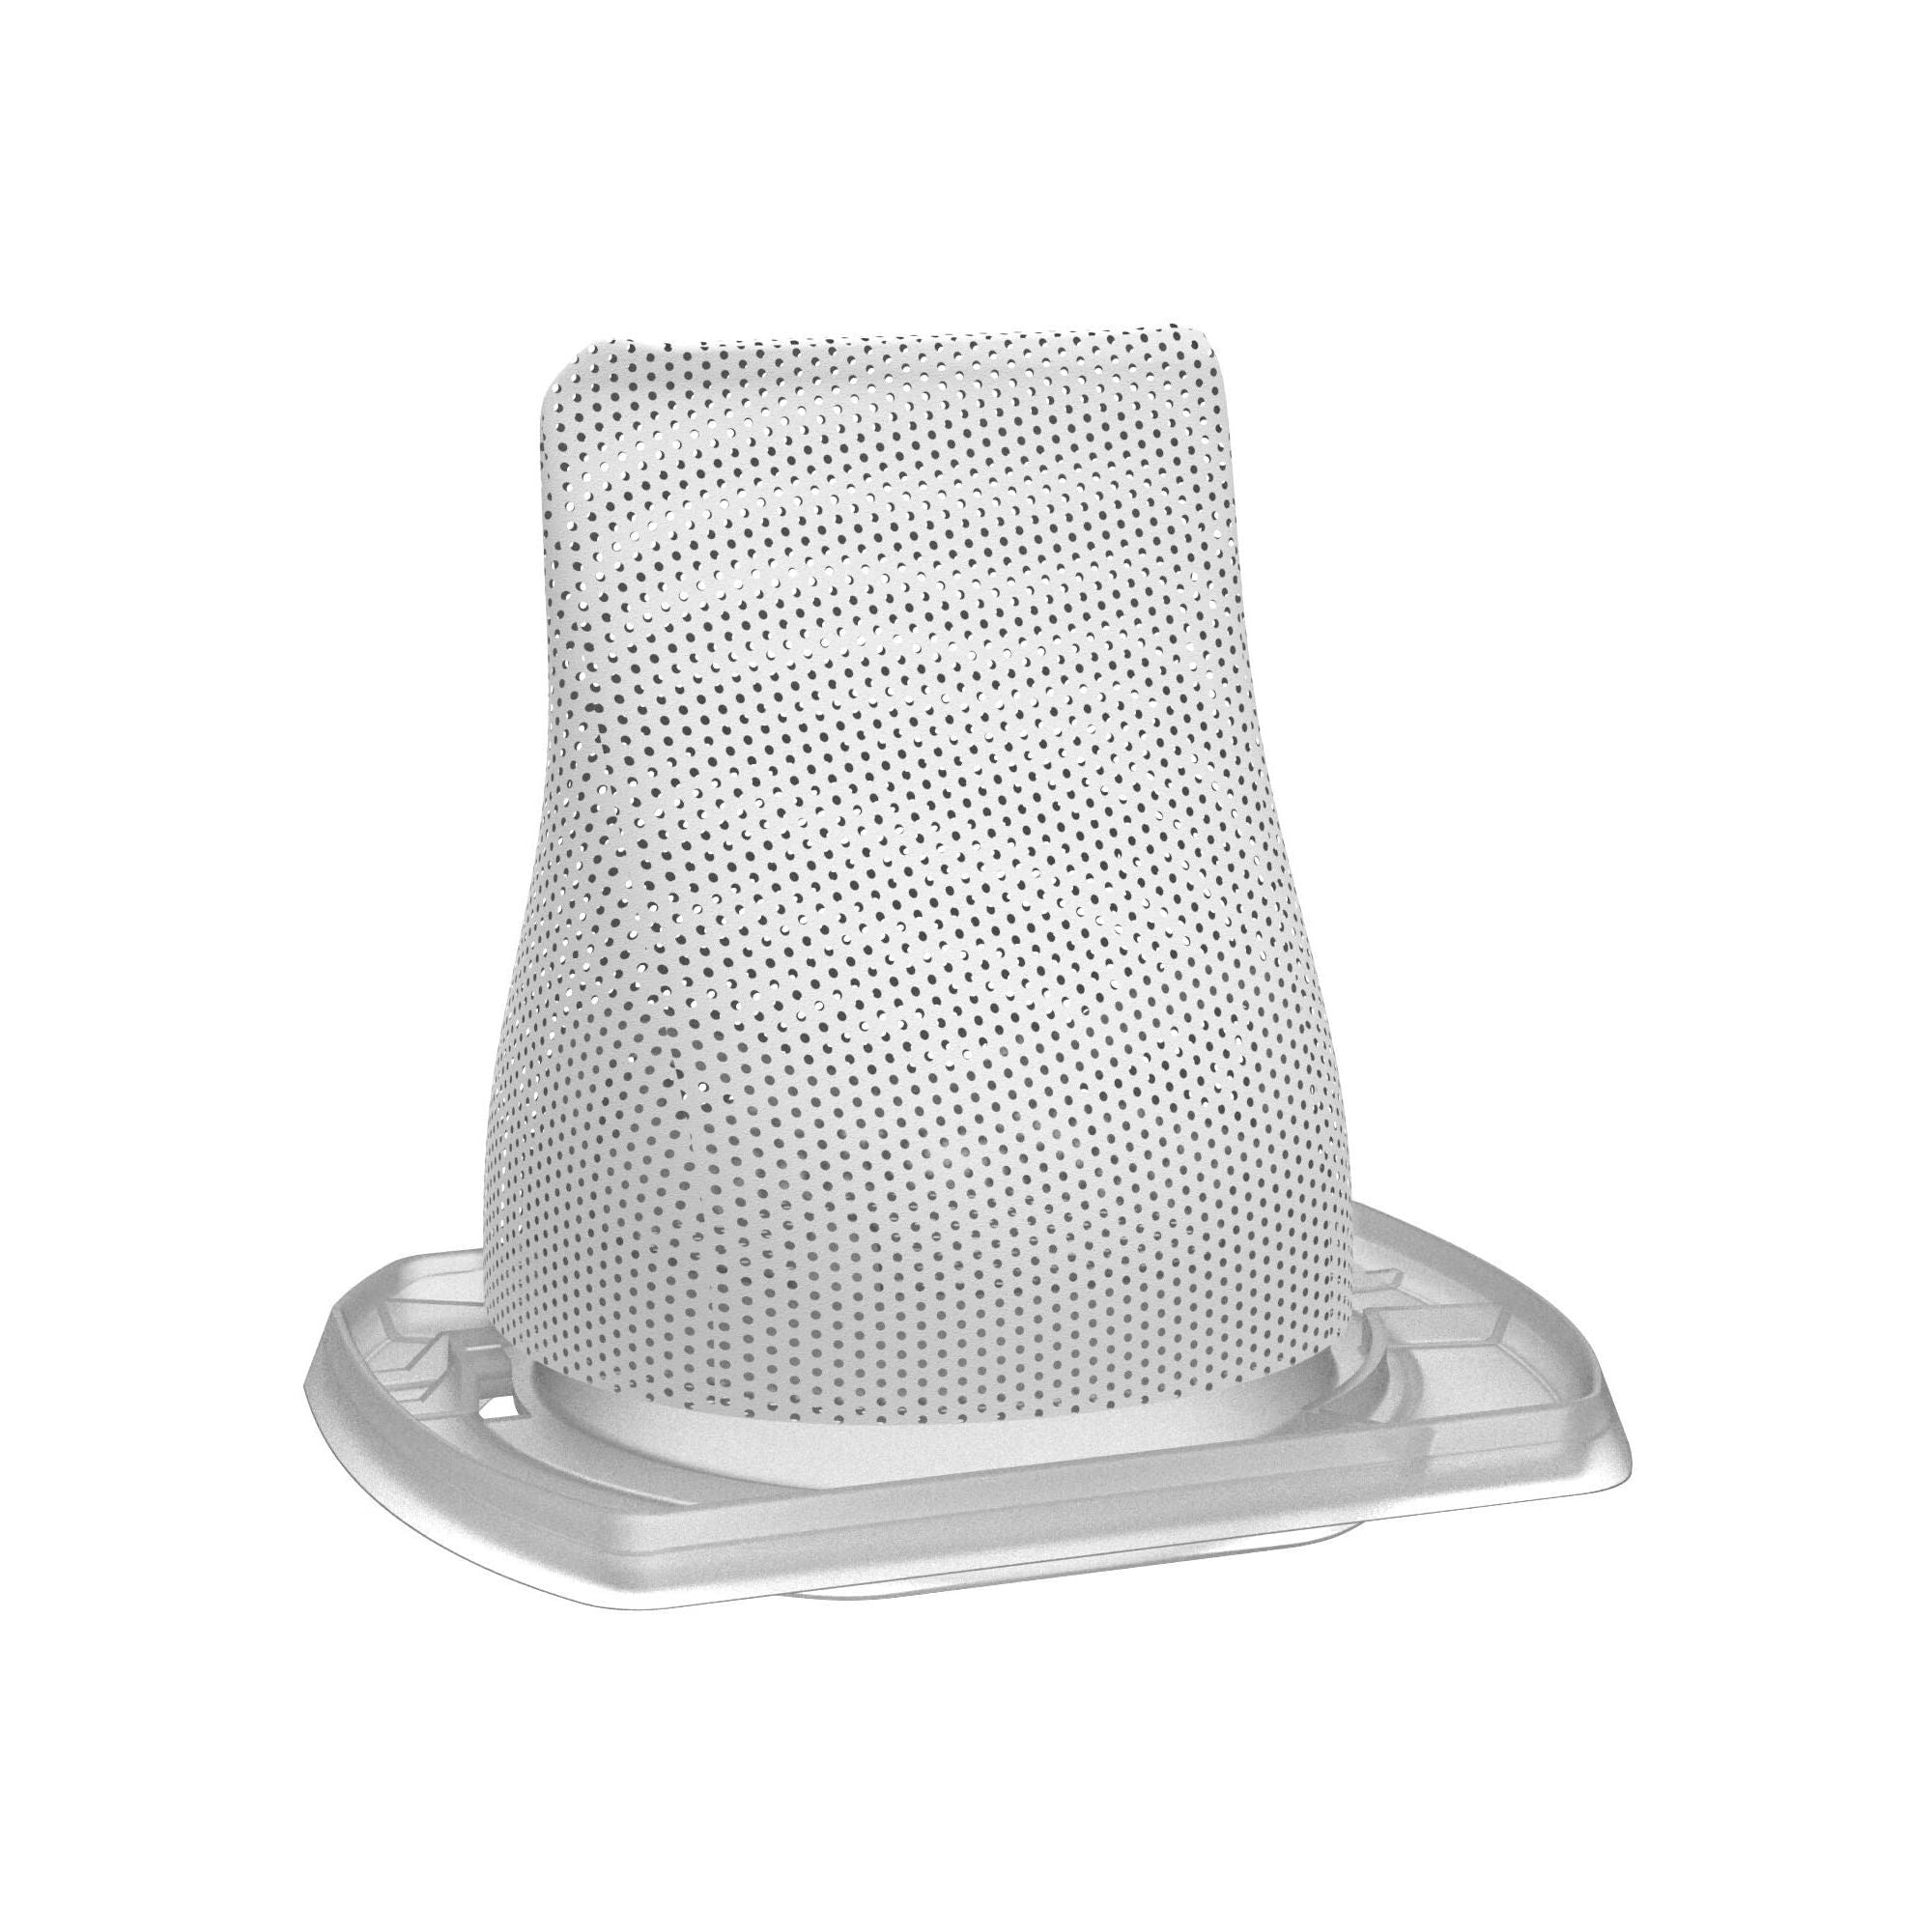 Black and Decker Dustbuster Filter Assembly